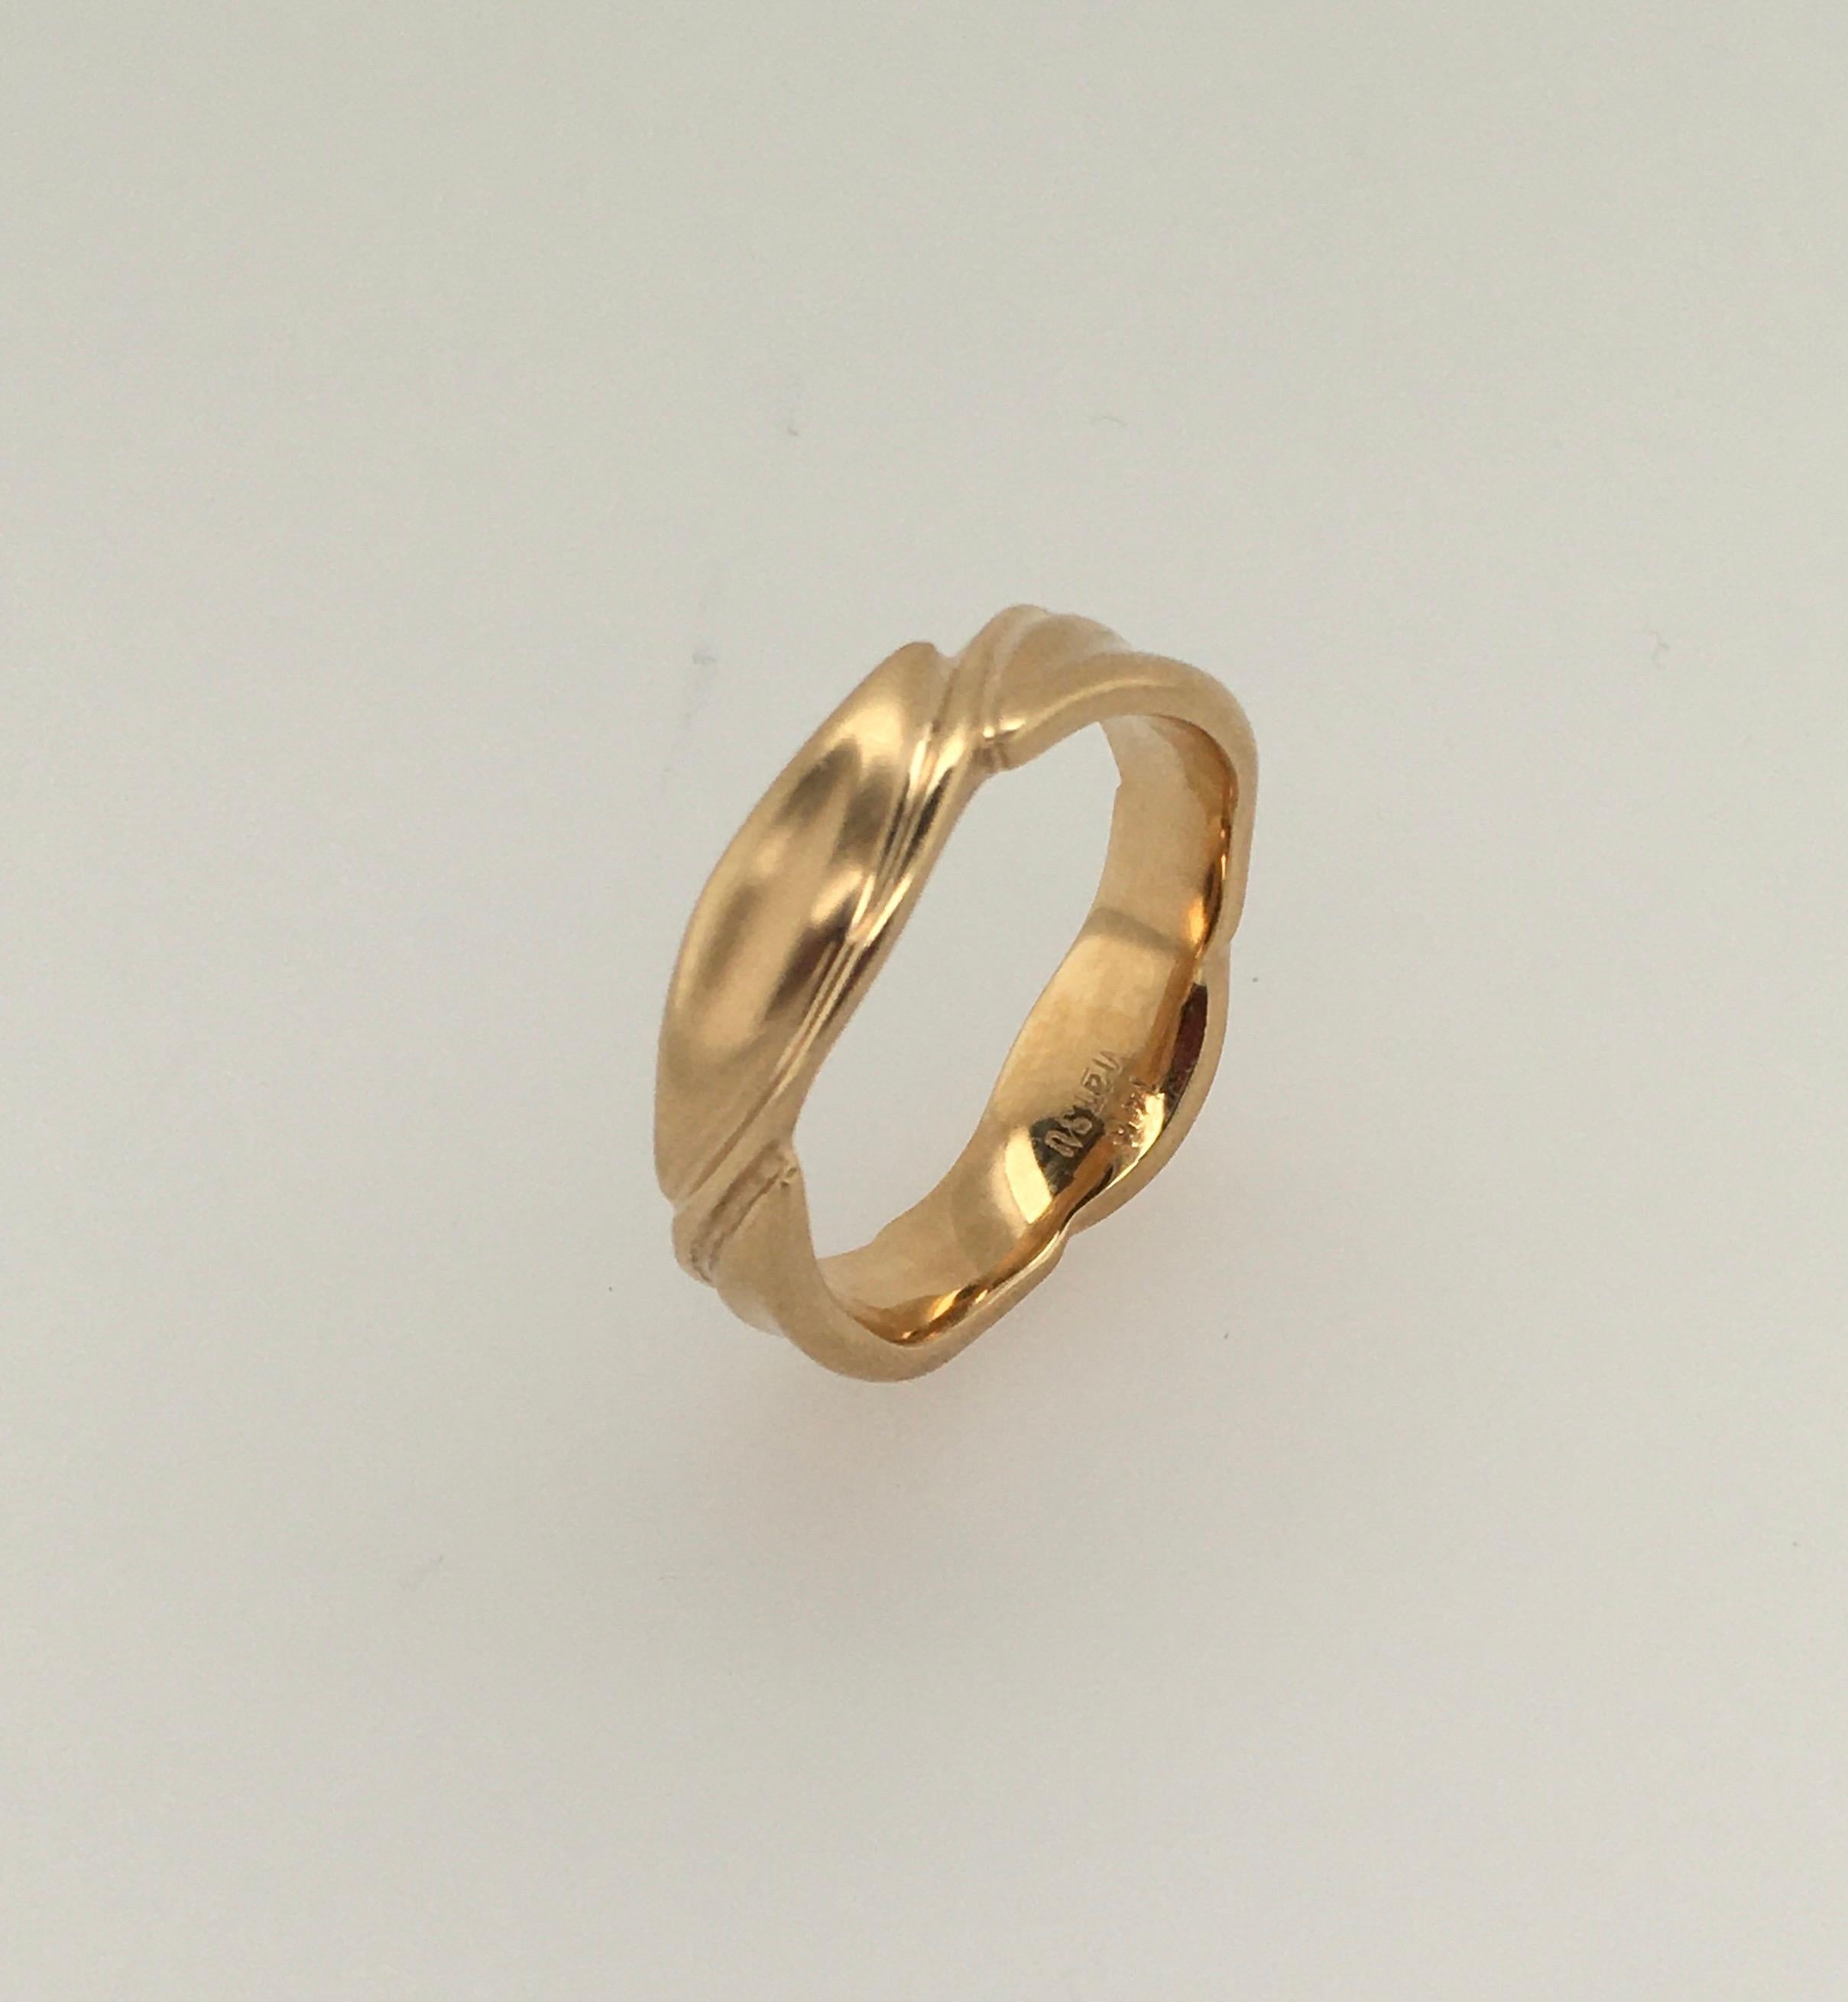 This sophisticated one-of-a-kind Guinevere wedding band features a stylized leaf and vine motif created in 14K yellow gold. The ring is enhanced with a dramatic satin finish with polished accents.  The width is approximately 5.8-6.0 mm. Makers mark